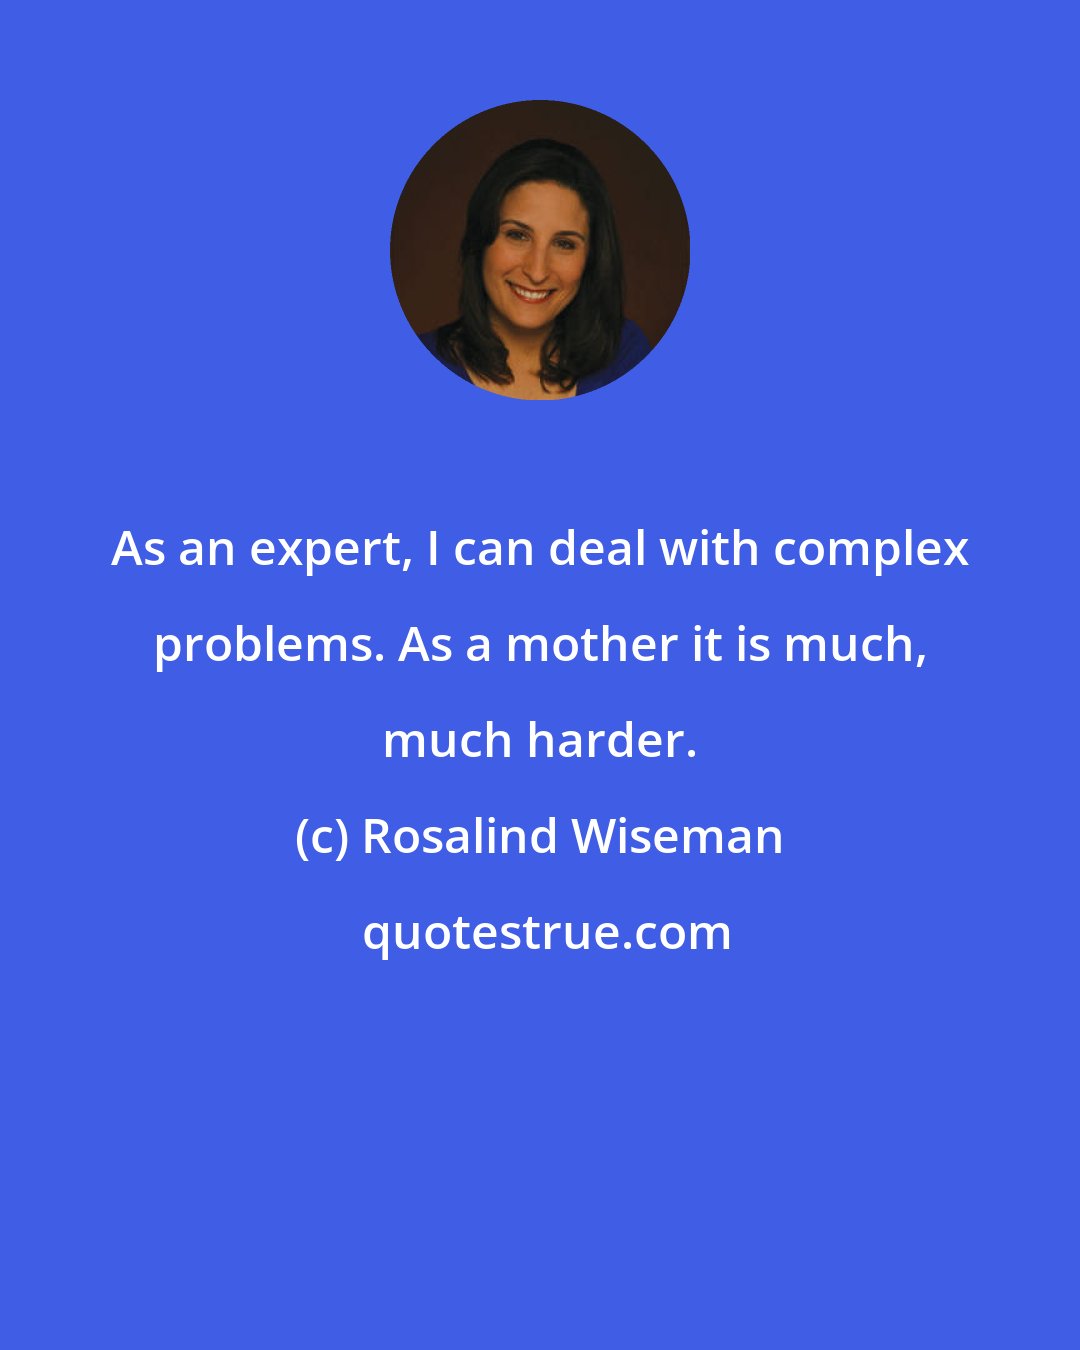 Rosalind Wiseman: As an expert, I can deal with complex problems. As a mother it is much, much harder.